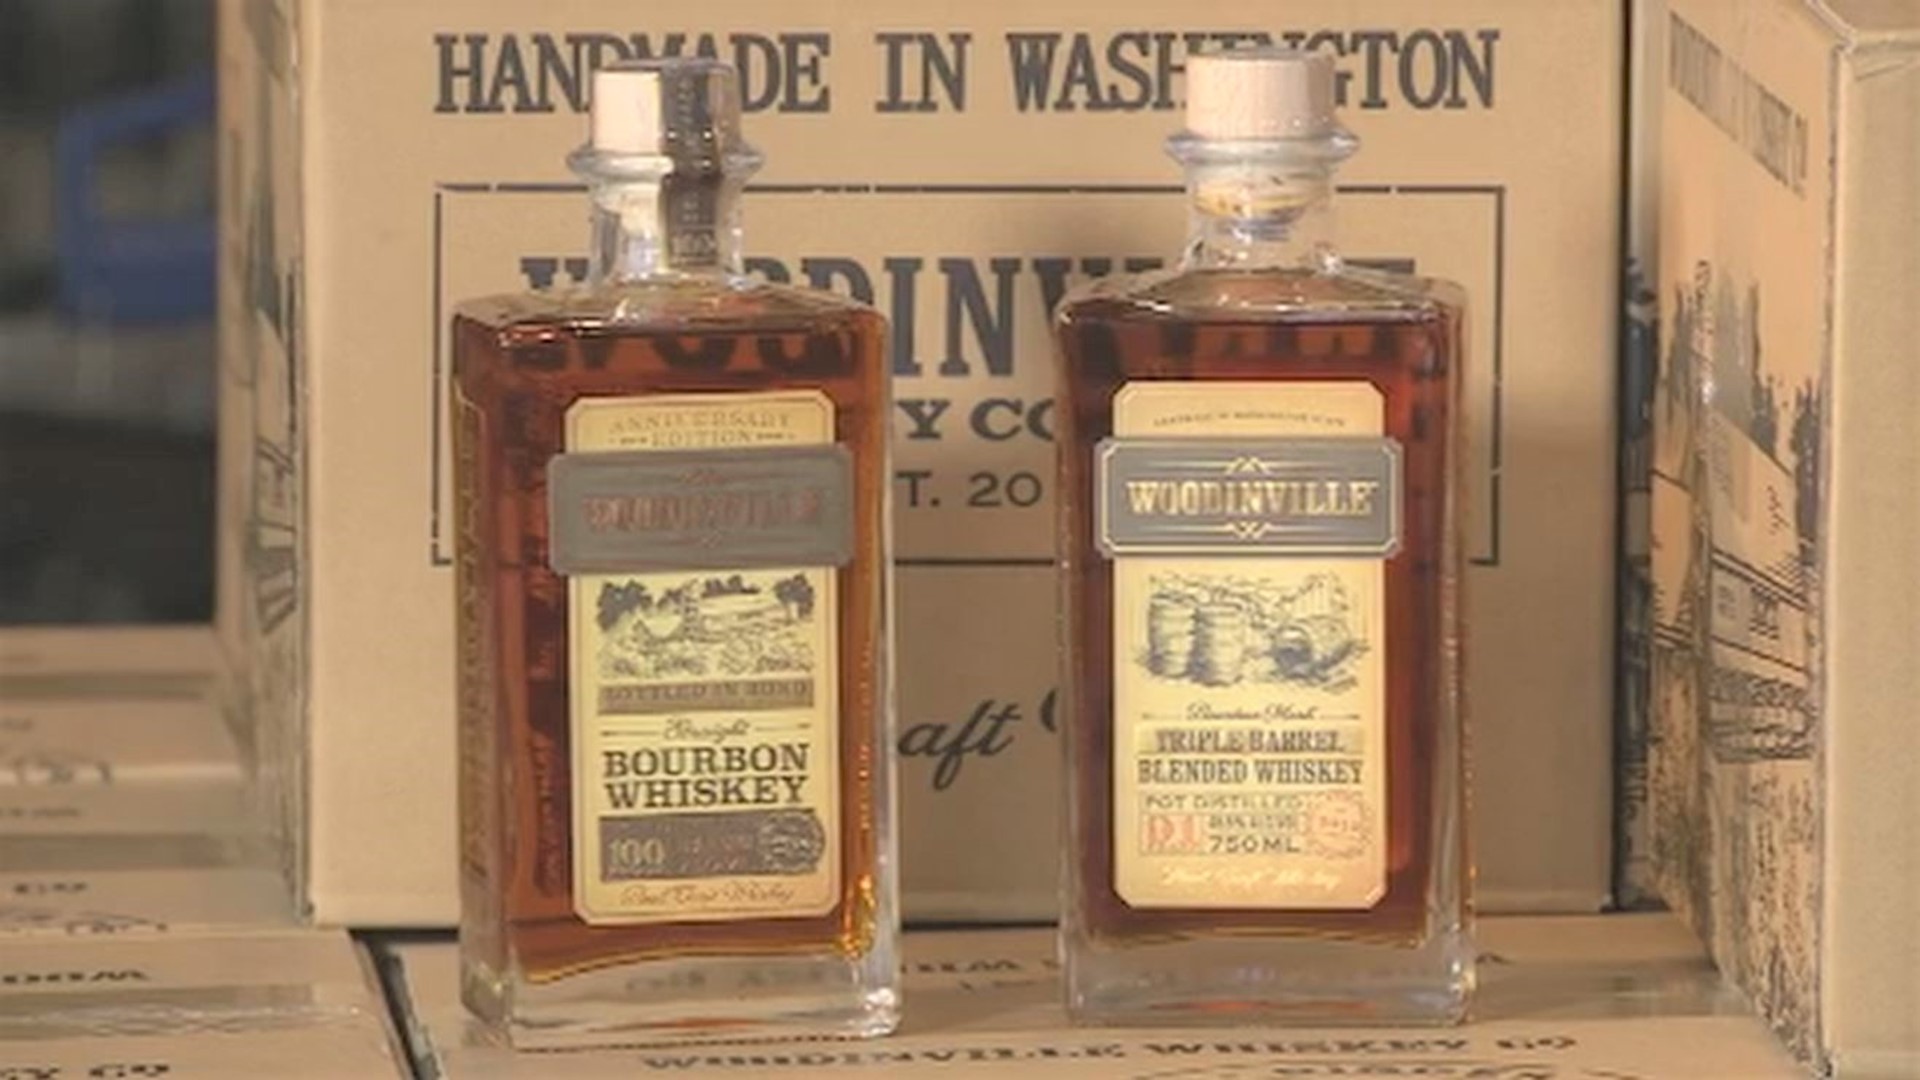 Washington whiskey fans should get these bottles while they can, they'll be gone soon